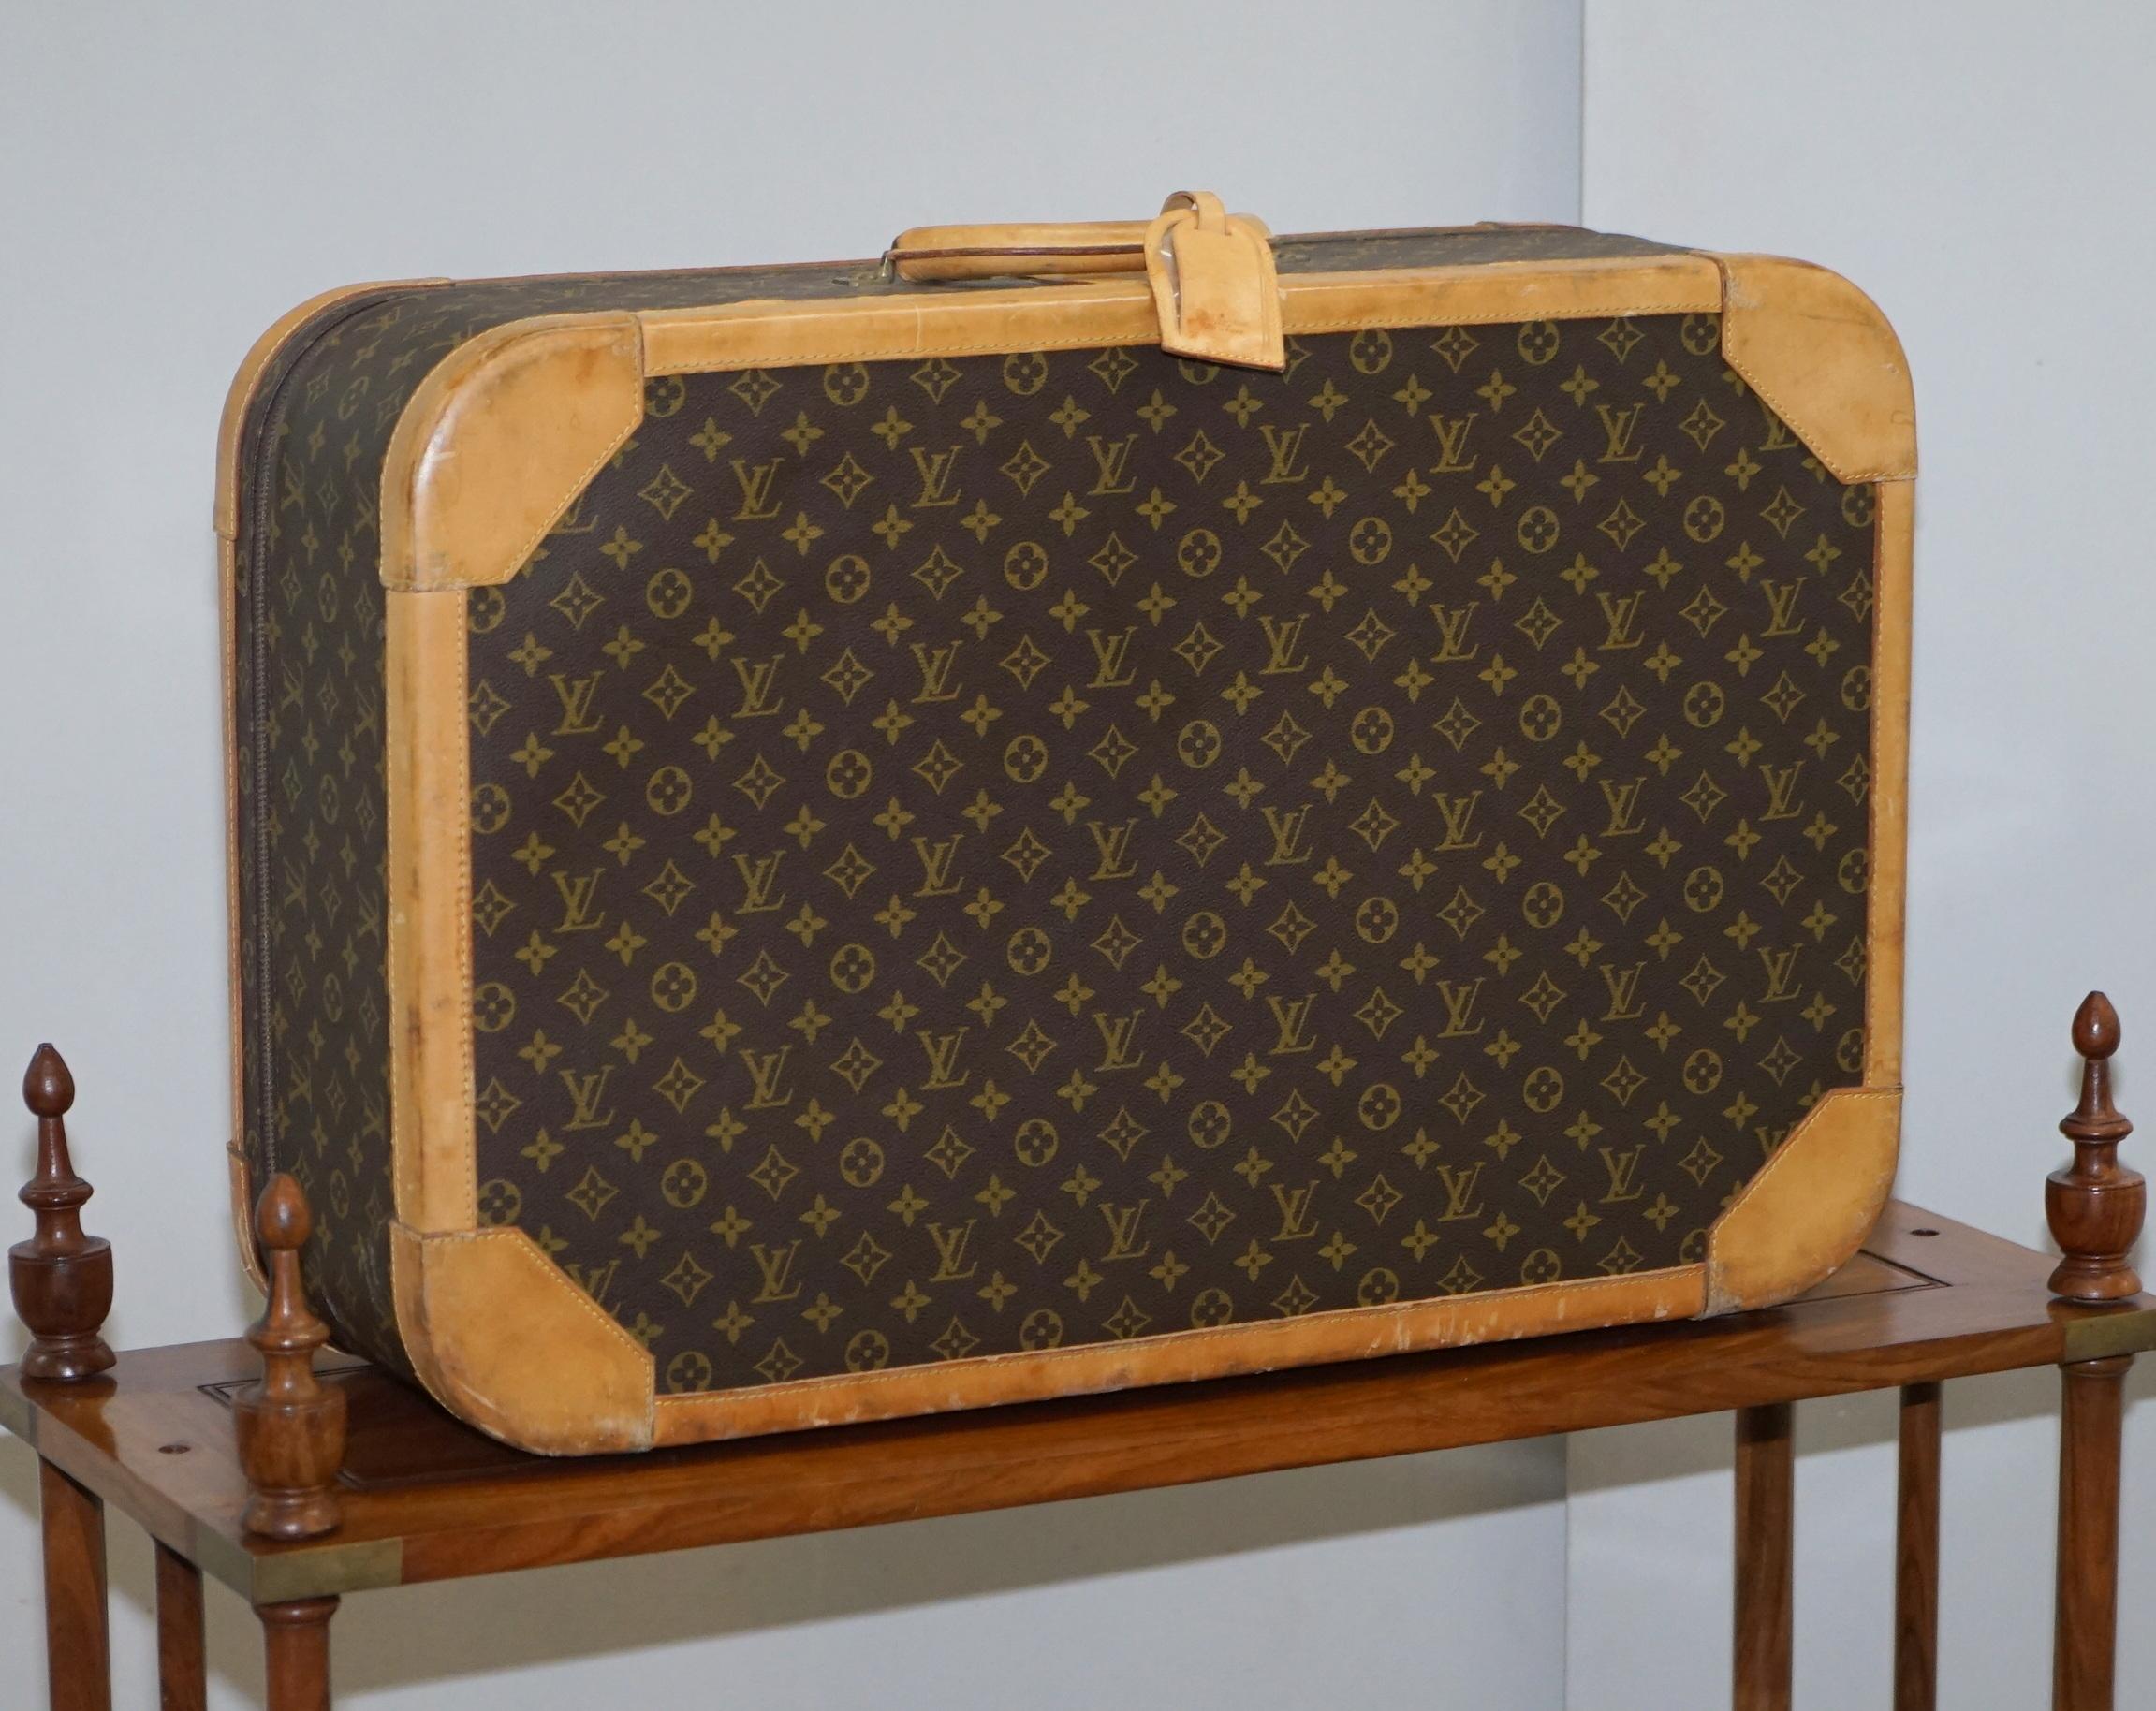 We are delighted to offer this lovely 100% original and unrestored circa 1970s Louis Vuitton Stratos 70 brown leather monogrammed suitcase original RRP £4,200

What a find, this is the first totally original and unrestored version of this bag I